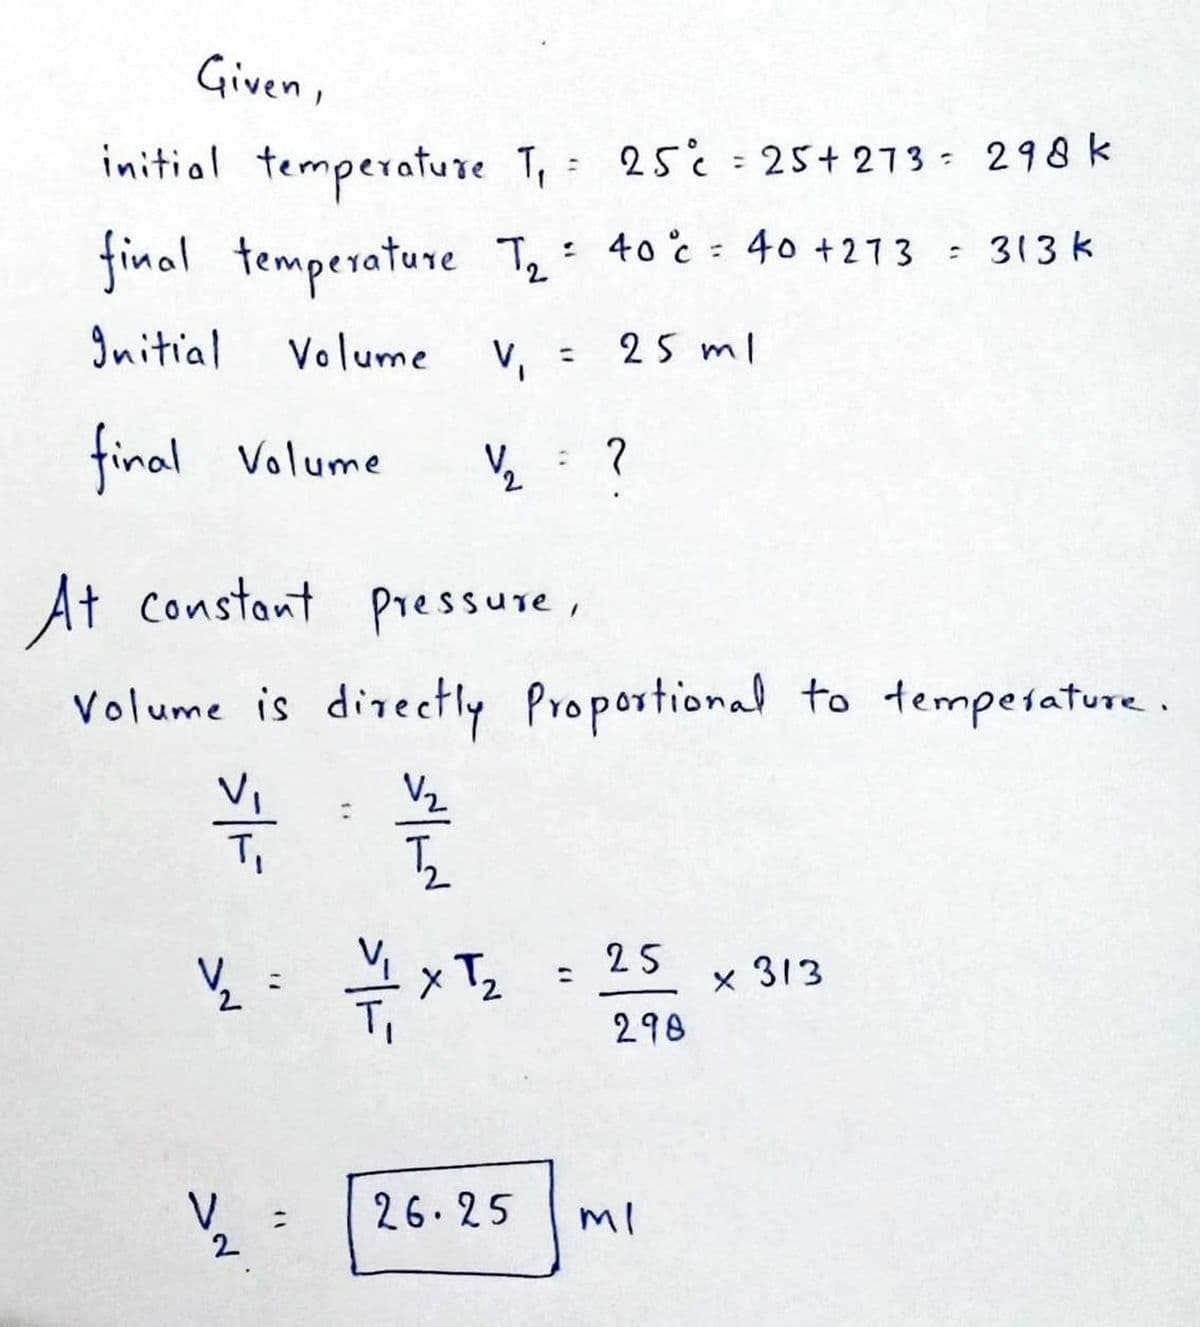 Given,
initial temperature T₁ =
final temperature T₂ =
2
Initial Volume V₁ = 25 ml
final Volume
1/2₂ ?
At constant pressure,
Volume is directly Proportional to temperature.
¥
V₂
5₂
— 1 x T₂
½/2₂
V
2
"
:
25°¢ = 25+ 273 298 k
40°c = 40 +273 = 313 k
26.25
(1
25
298
ml
x 313